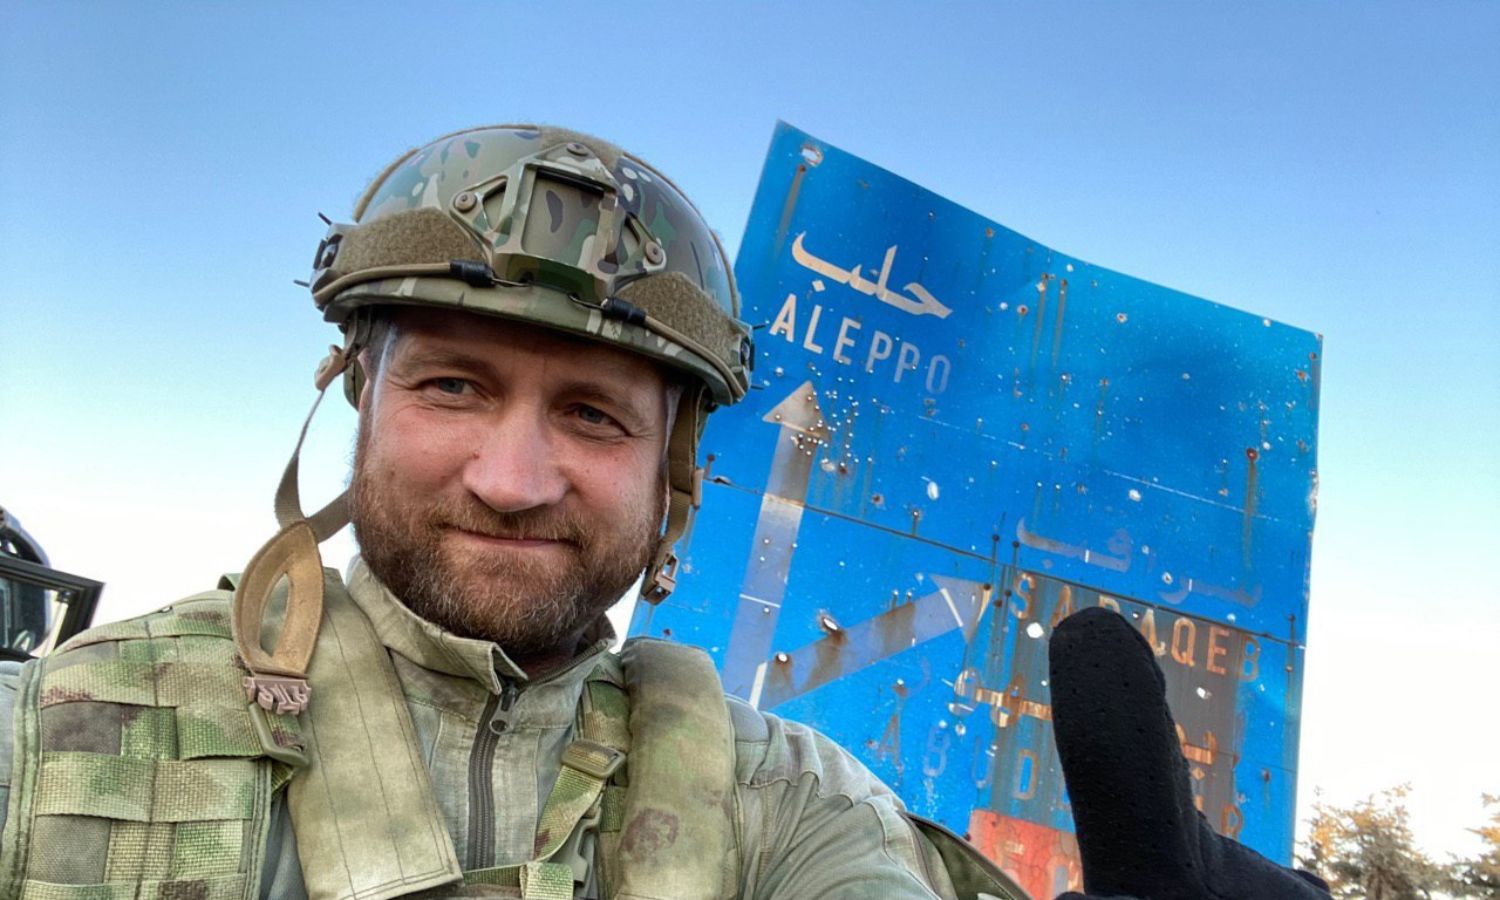 Russian fighter and war correspondent Oleg Blokhin near the city of Aleppo - 14 August 2020 (Blokhin’s account on Twitter)